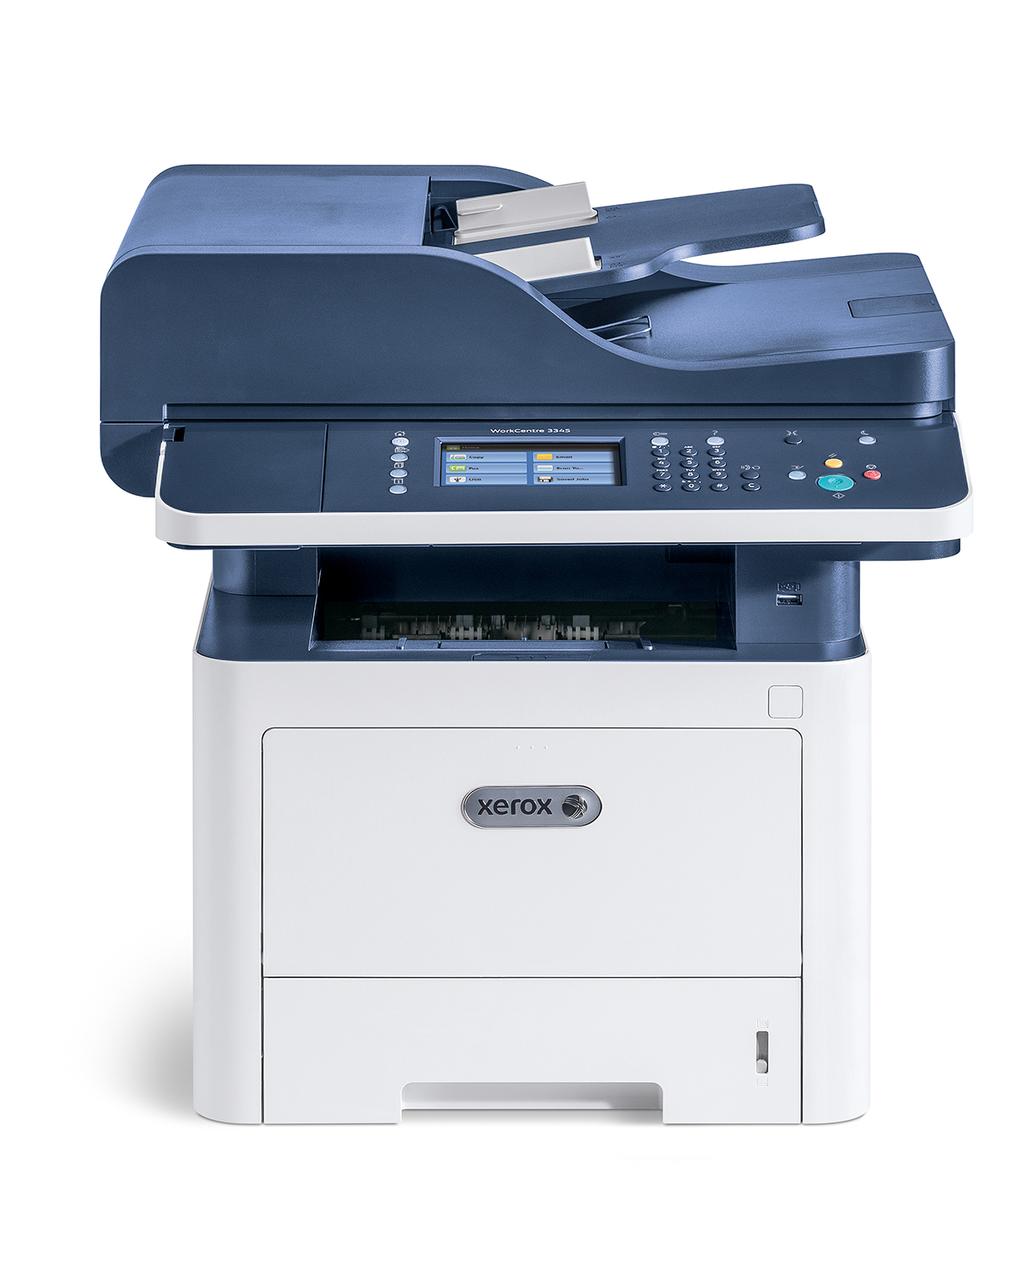 Xerox WorkCentre 3335/3345 Multifunction Printer System Specification 8.5 x 11 in. Up to 35 ppm Up to 42 ppm A4 / 210 x 297 mm Up to 33 ppm Up to 40 ppm 8.5 x 14 in.